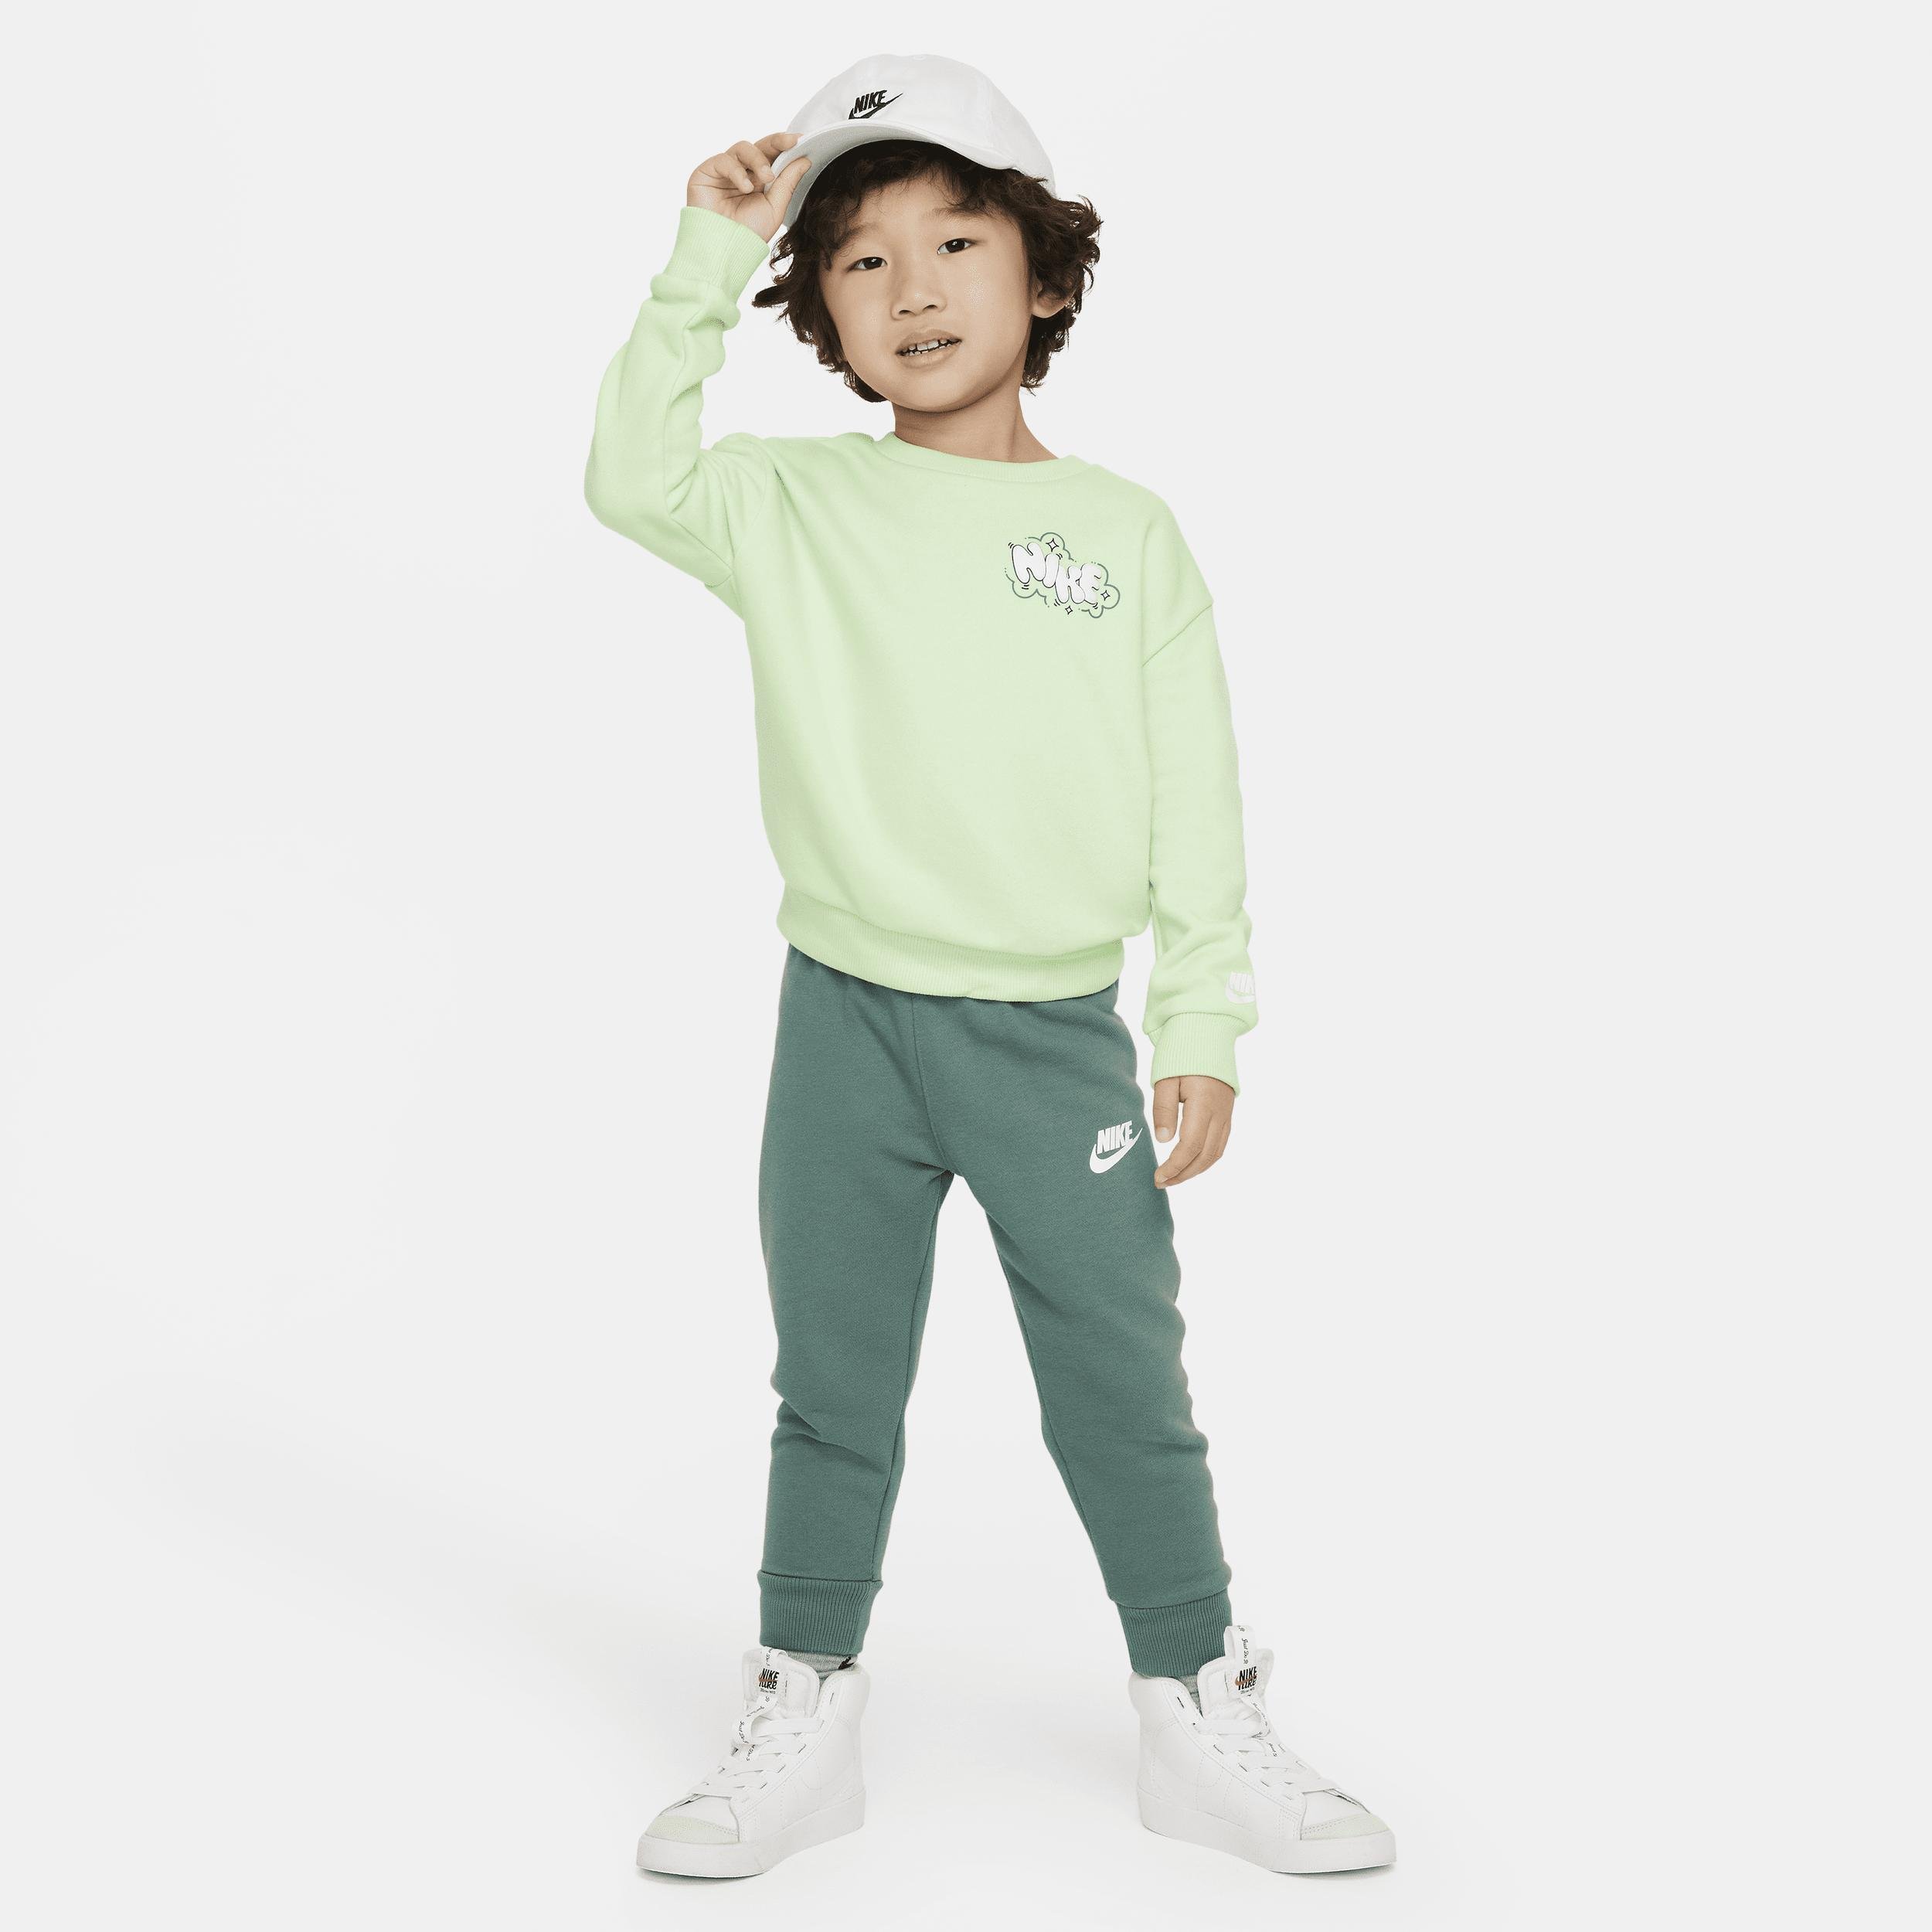 Nike Sportswear Create Your Own Adventure Toddler French Terry Graphic Crew Set by NIKE